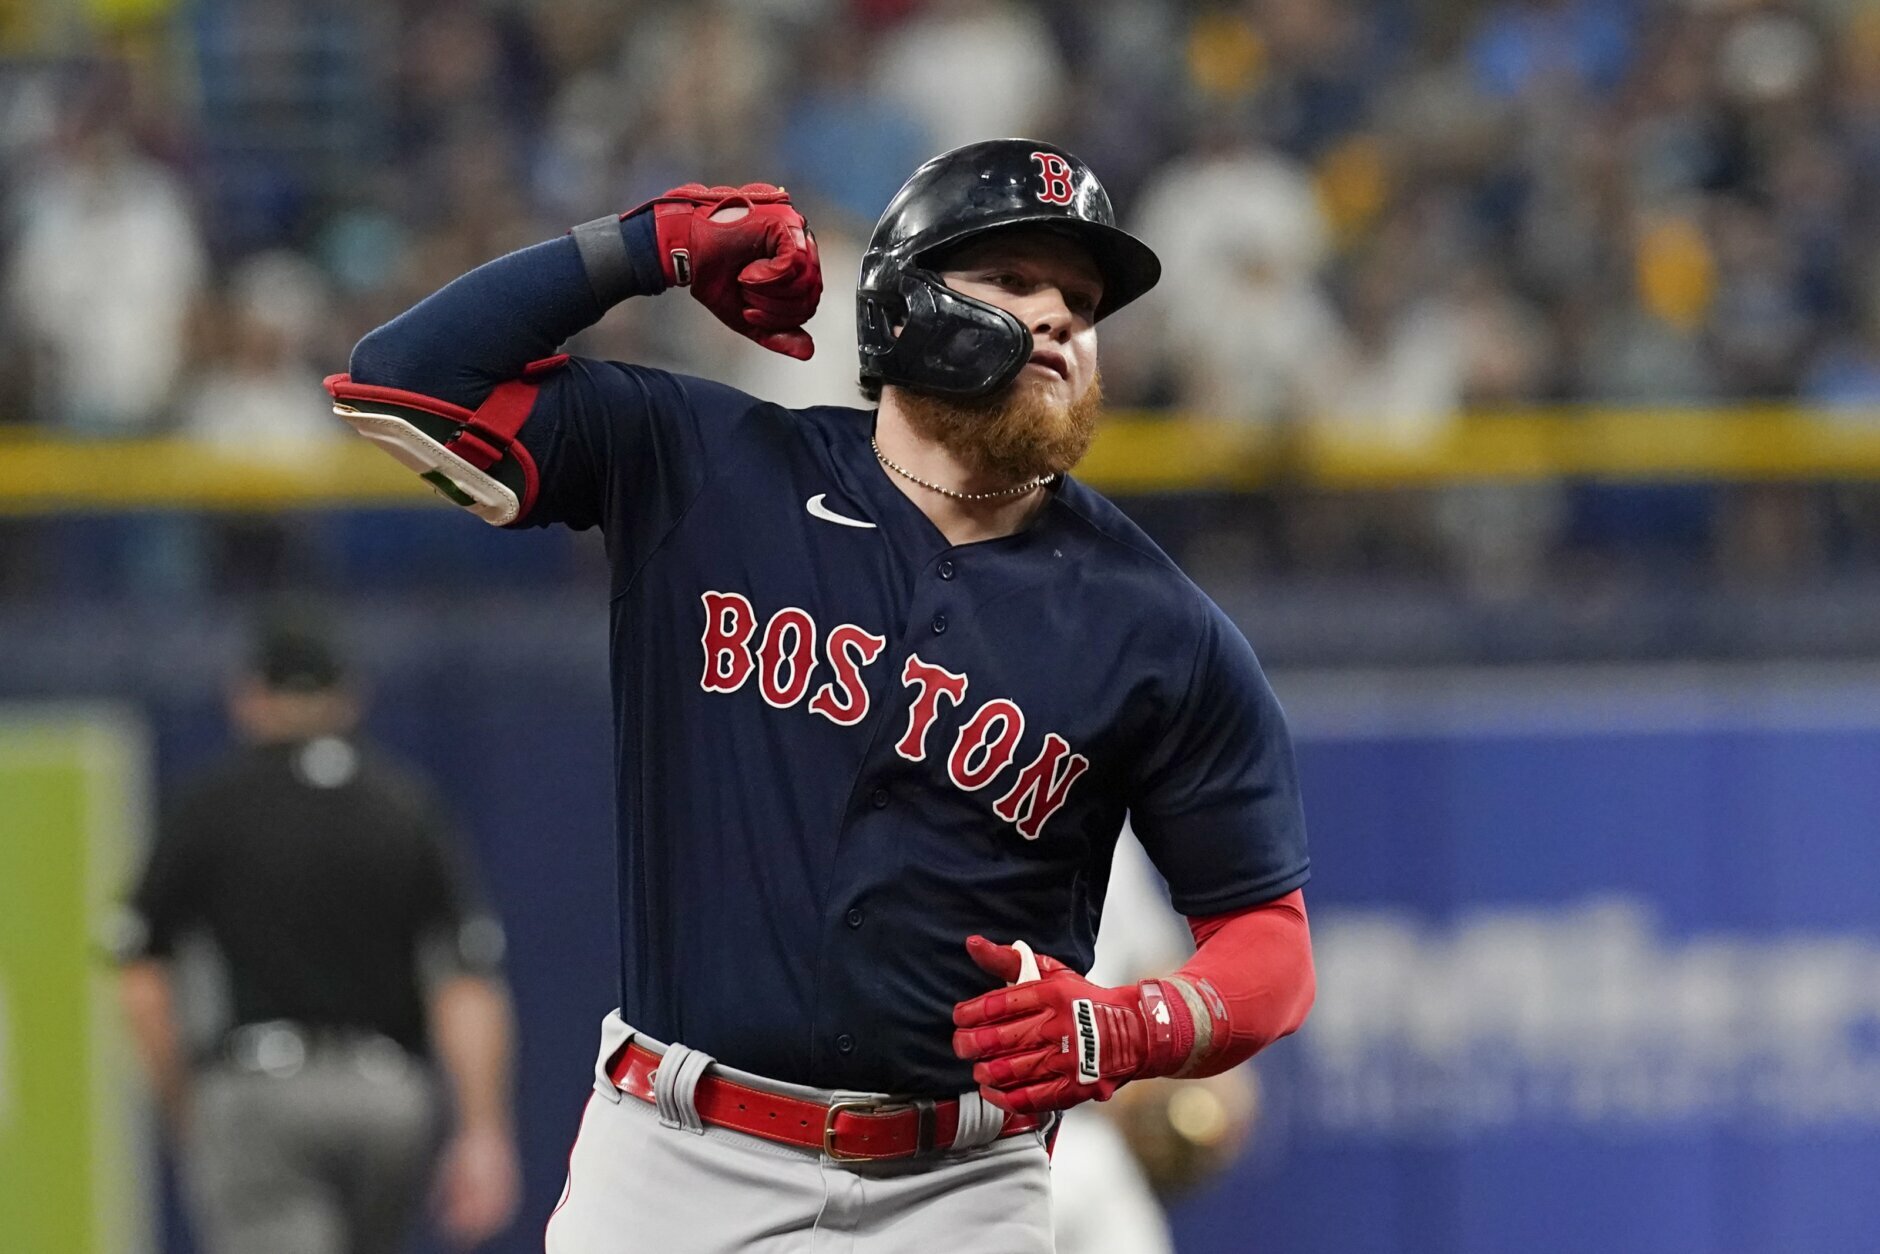 Red Sox Final: Alex Verdugo Keeps It Going As Red Sox Fall To Rays